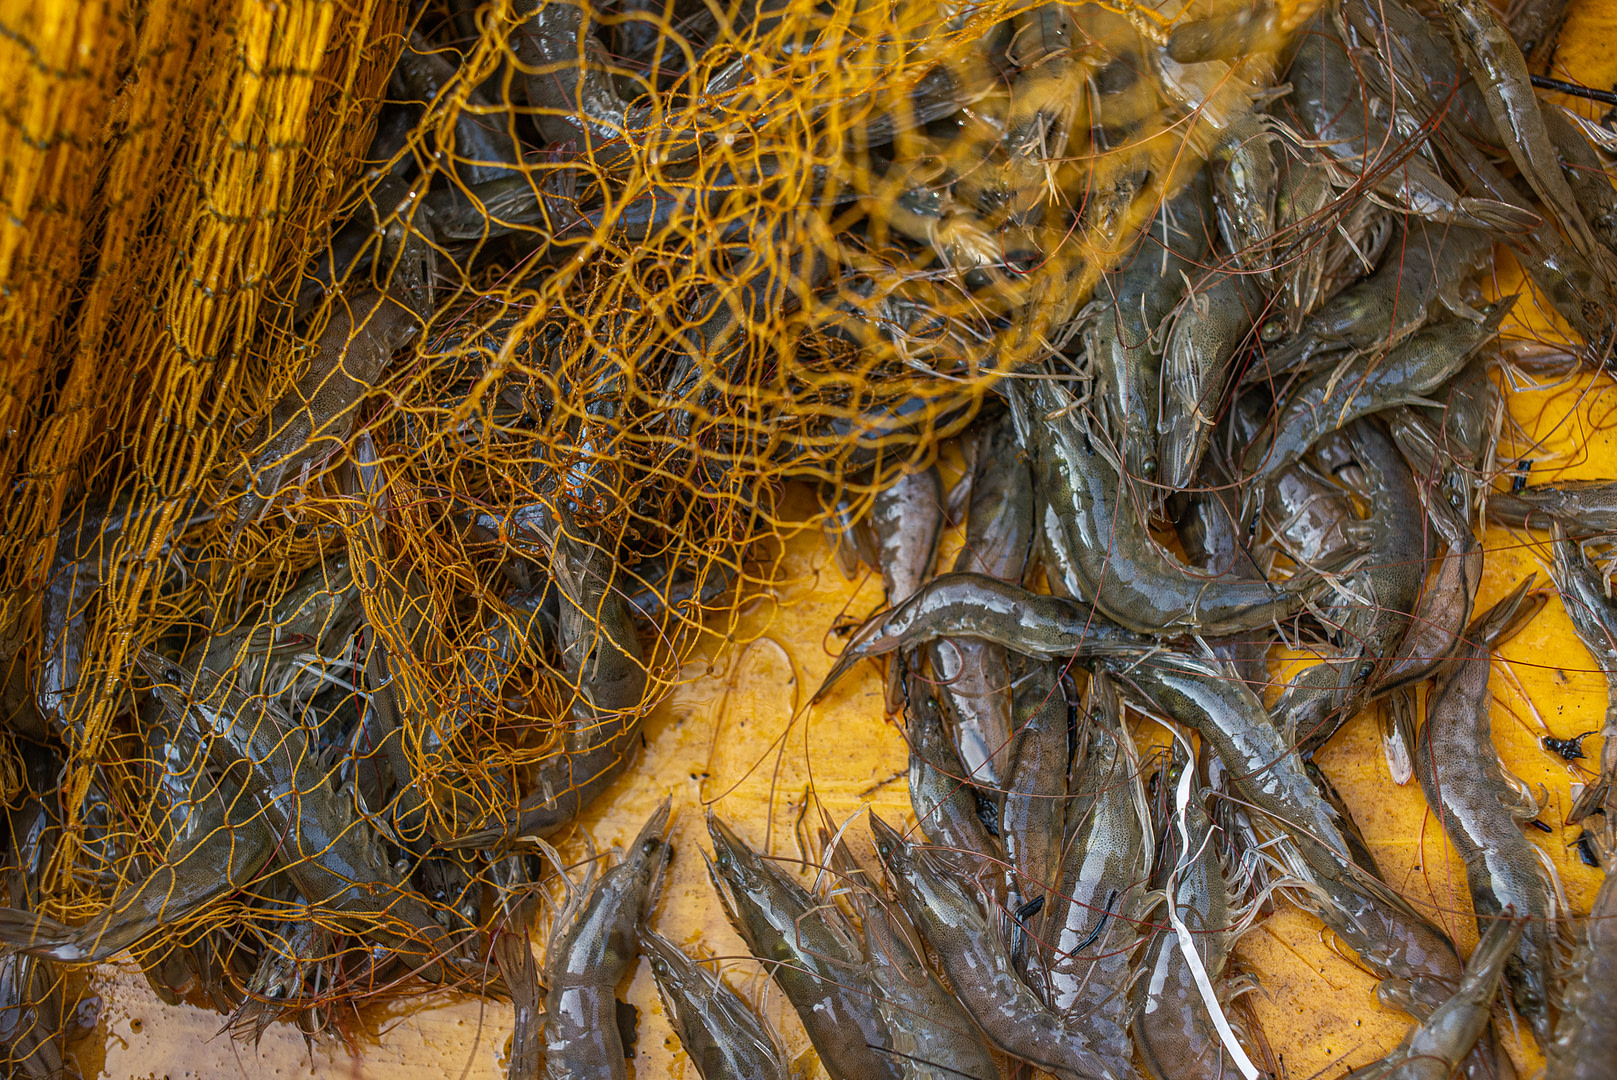 From Source to Sale: Shrimp Farming and Fishing in India